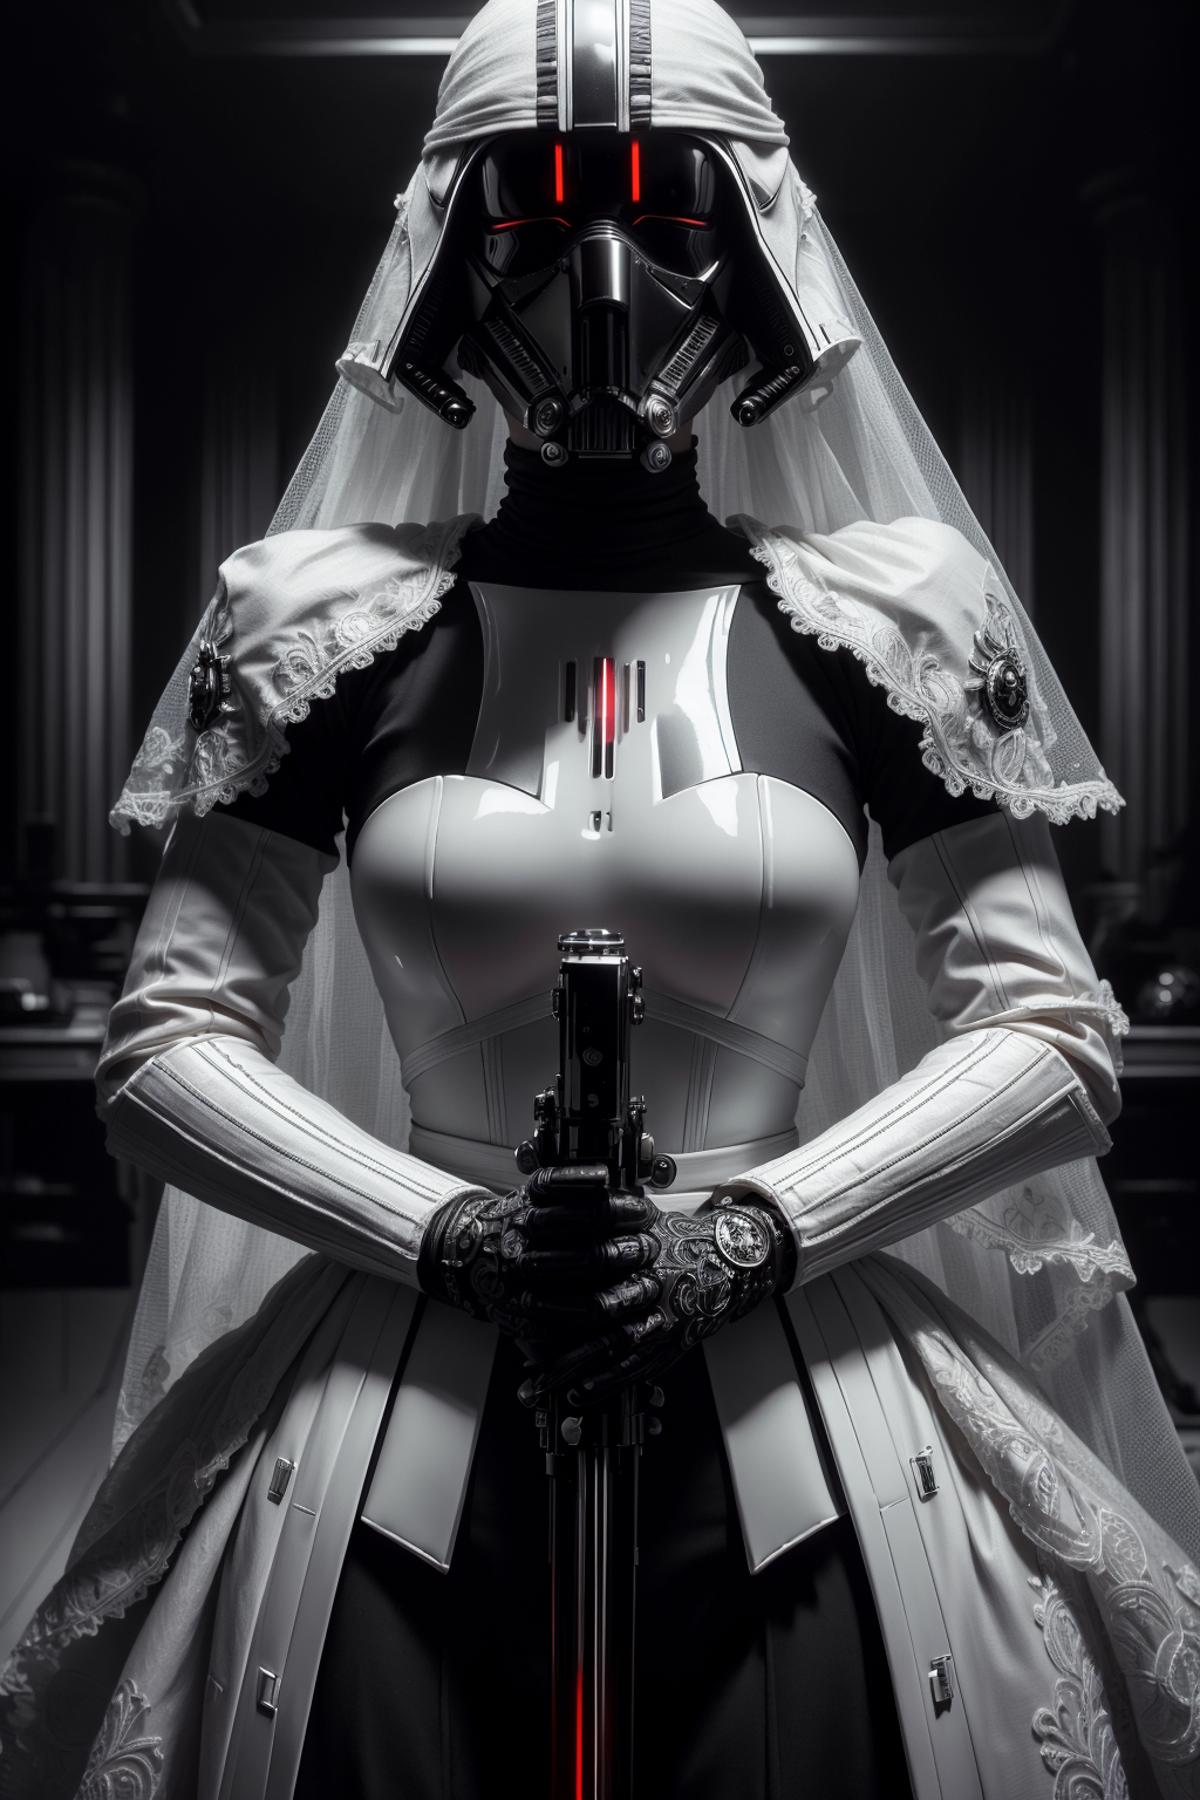 Galactic Empire Style - Stormtroopify anything! image by CGArtist